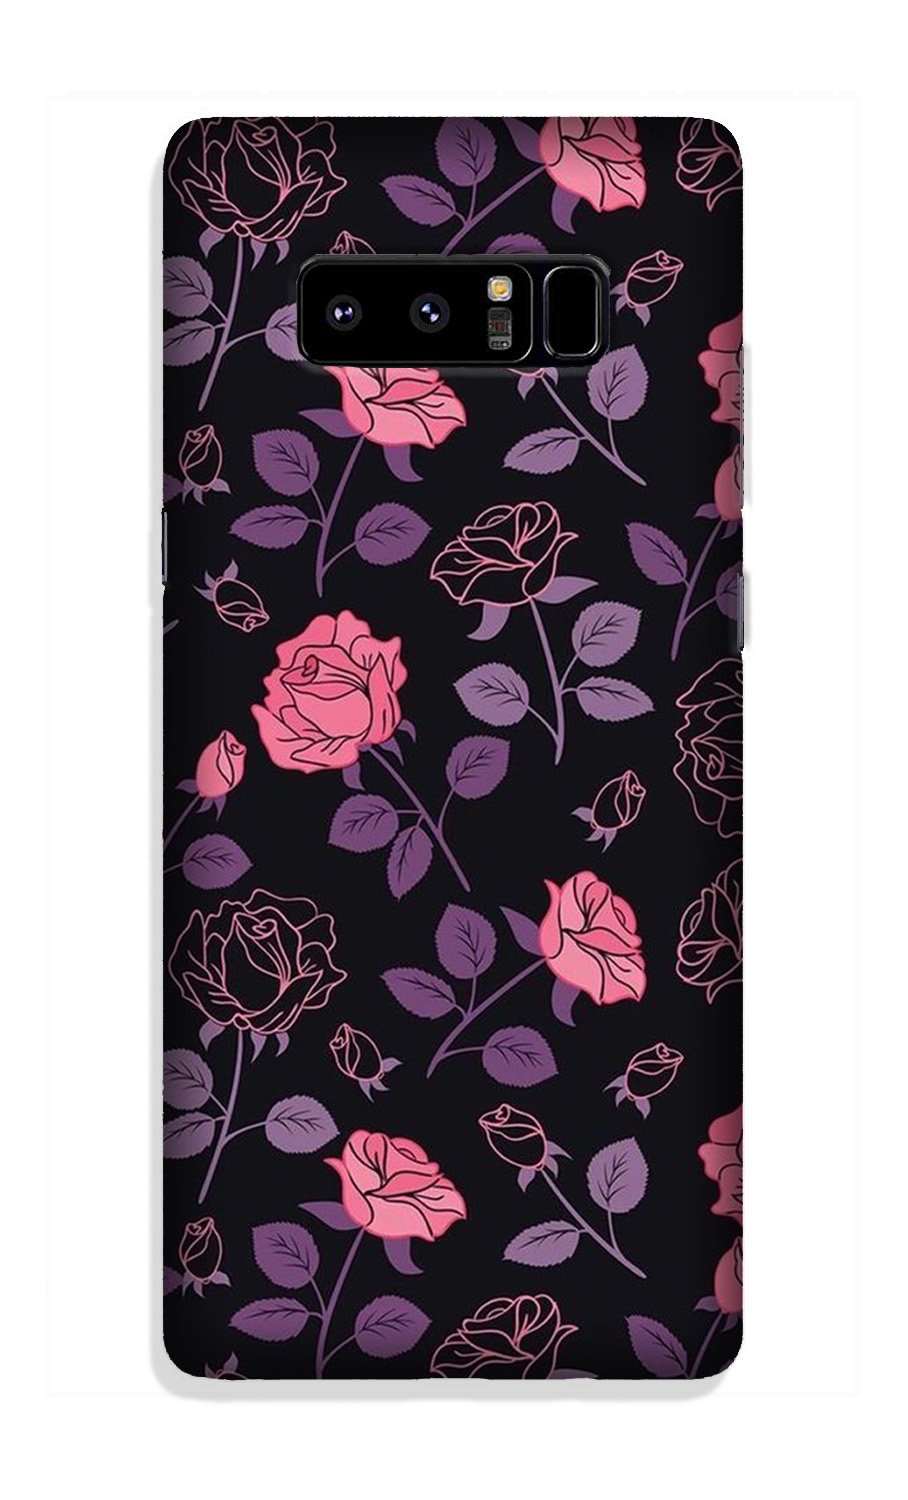 Rose Black Background Case for Galaxy Note 8